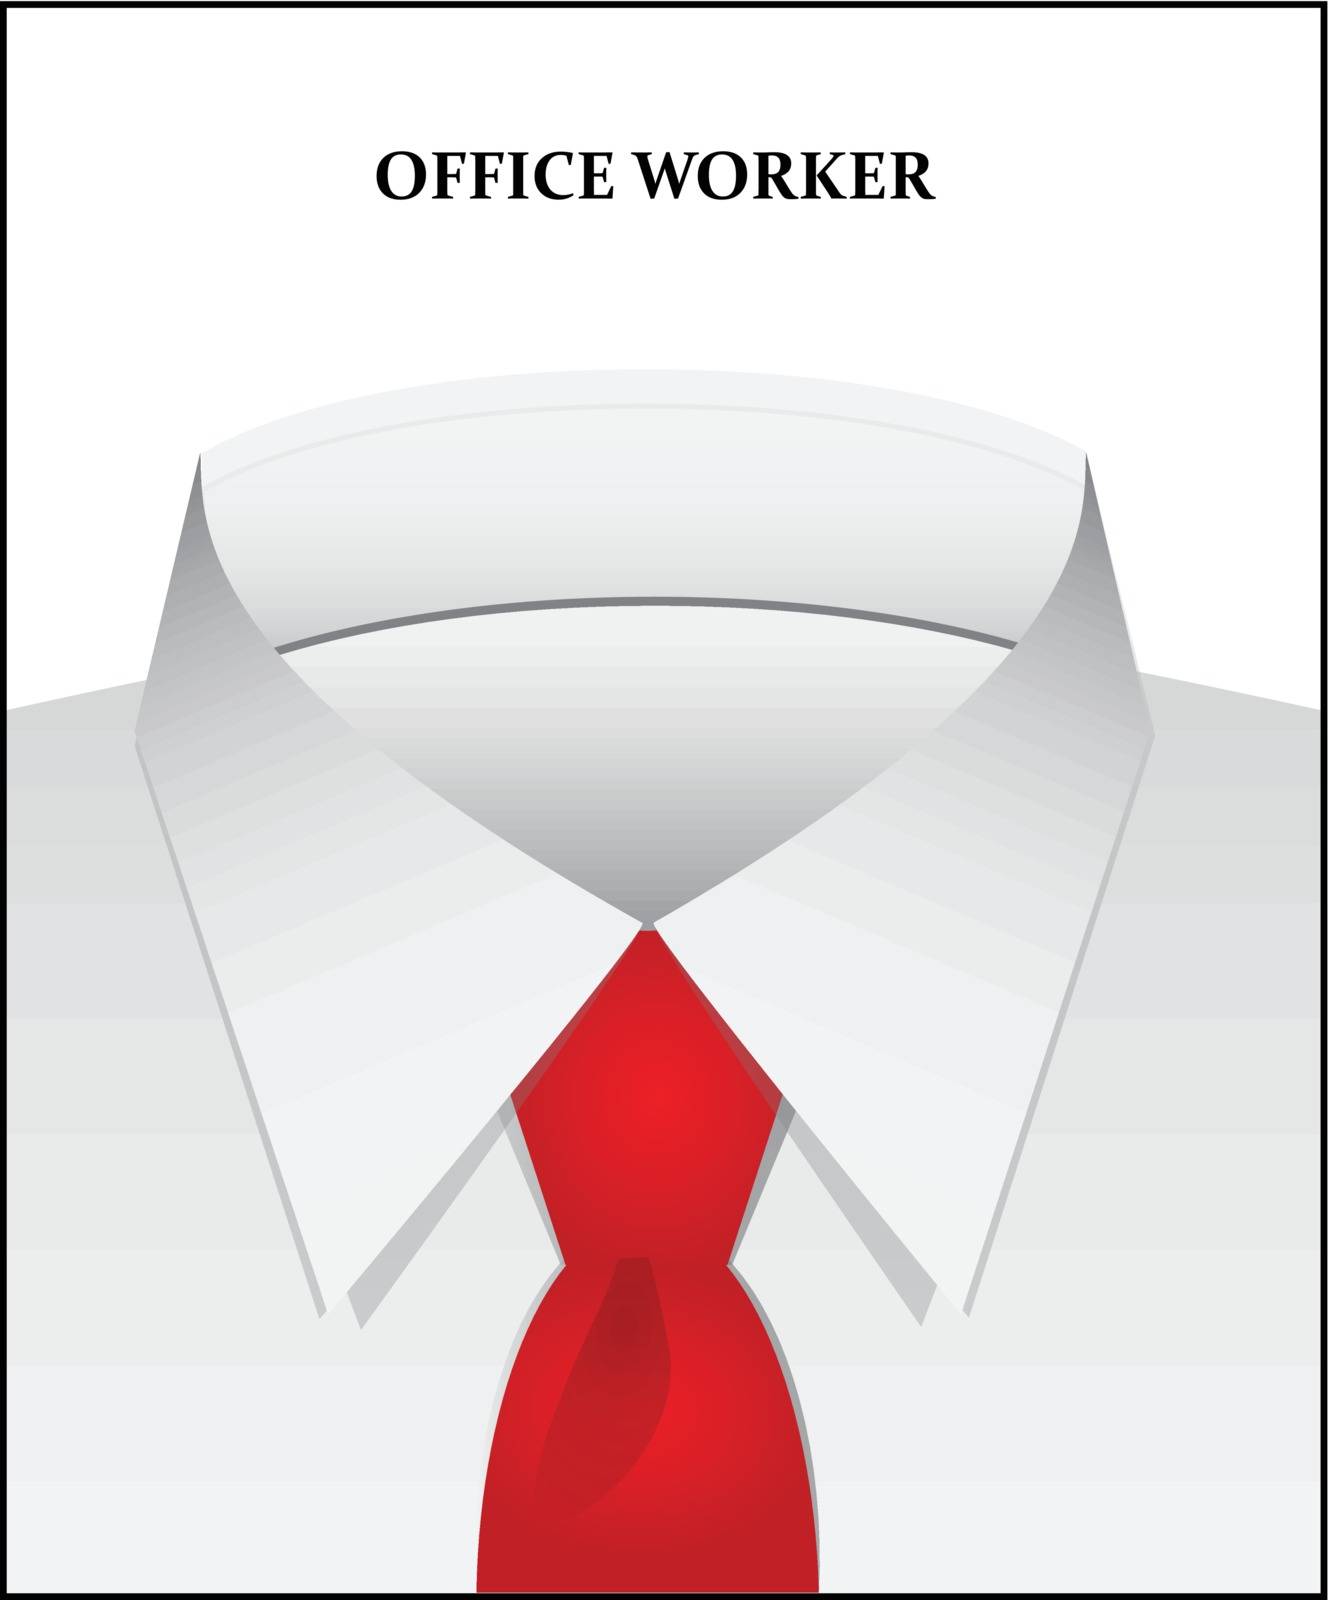 Clothing style office worker - a white shirt and tie. Vector illustration.